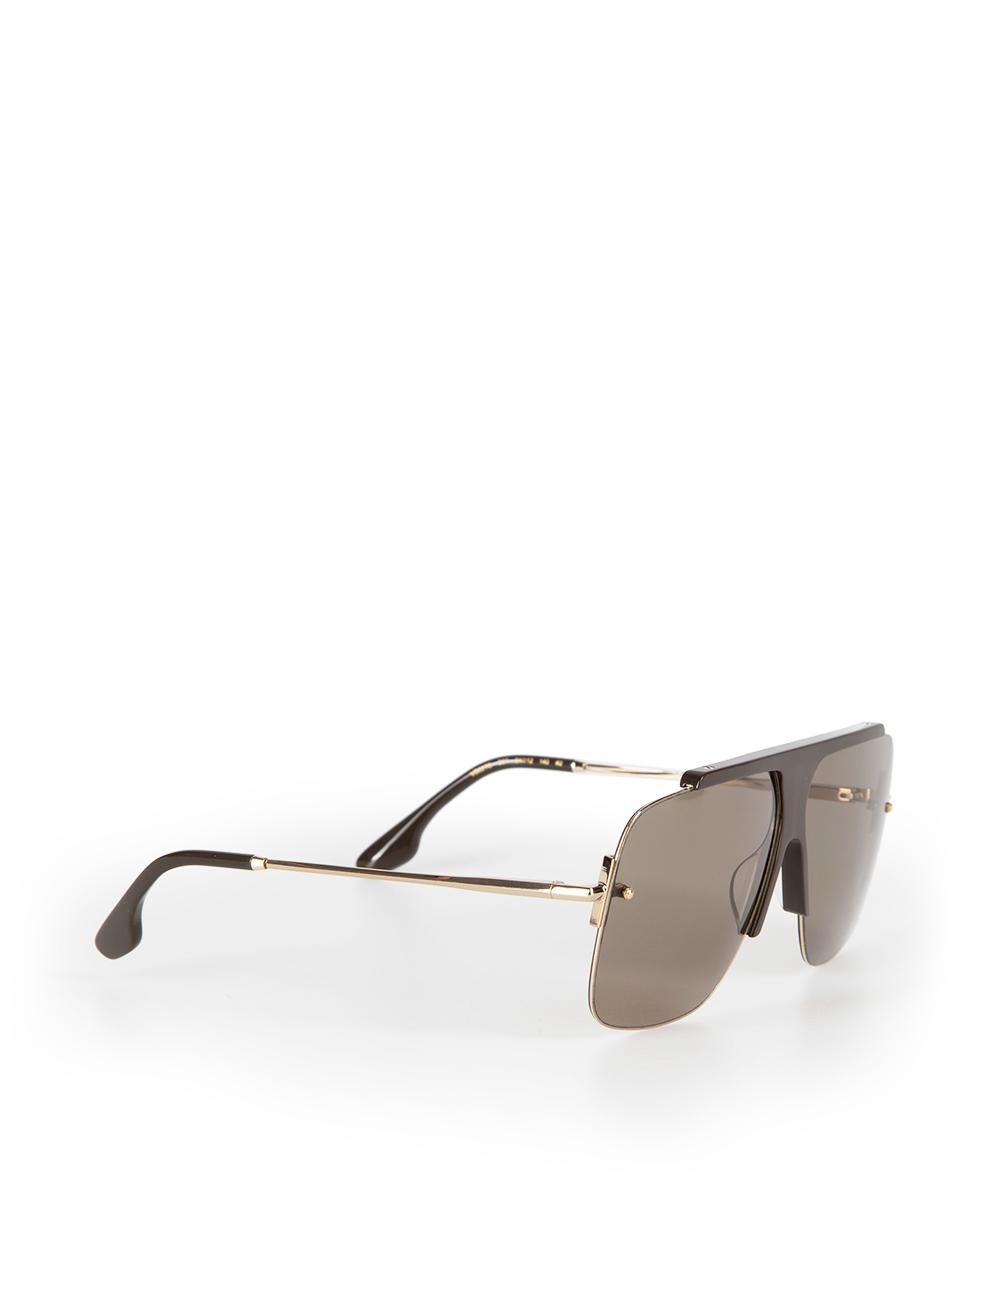 Victoria Beckham Mocha Navigator Frame Sunglasses In New Condition For Sale In London, GB